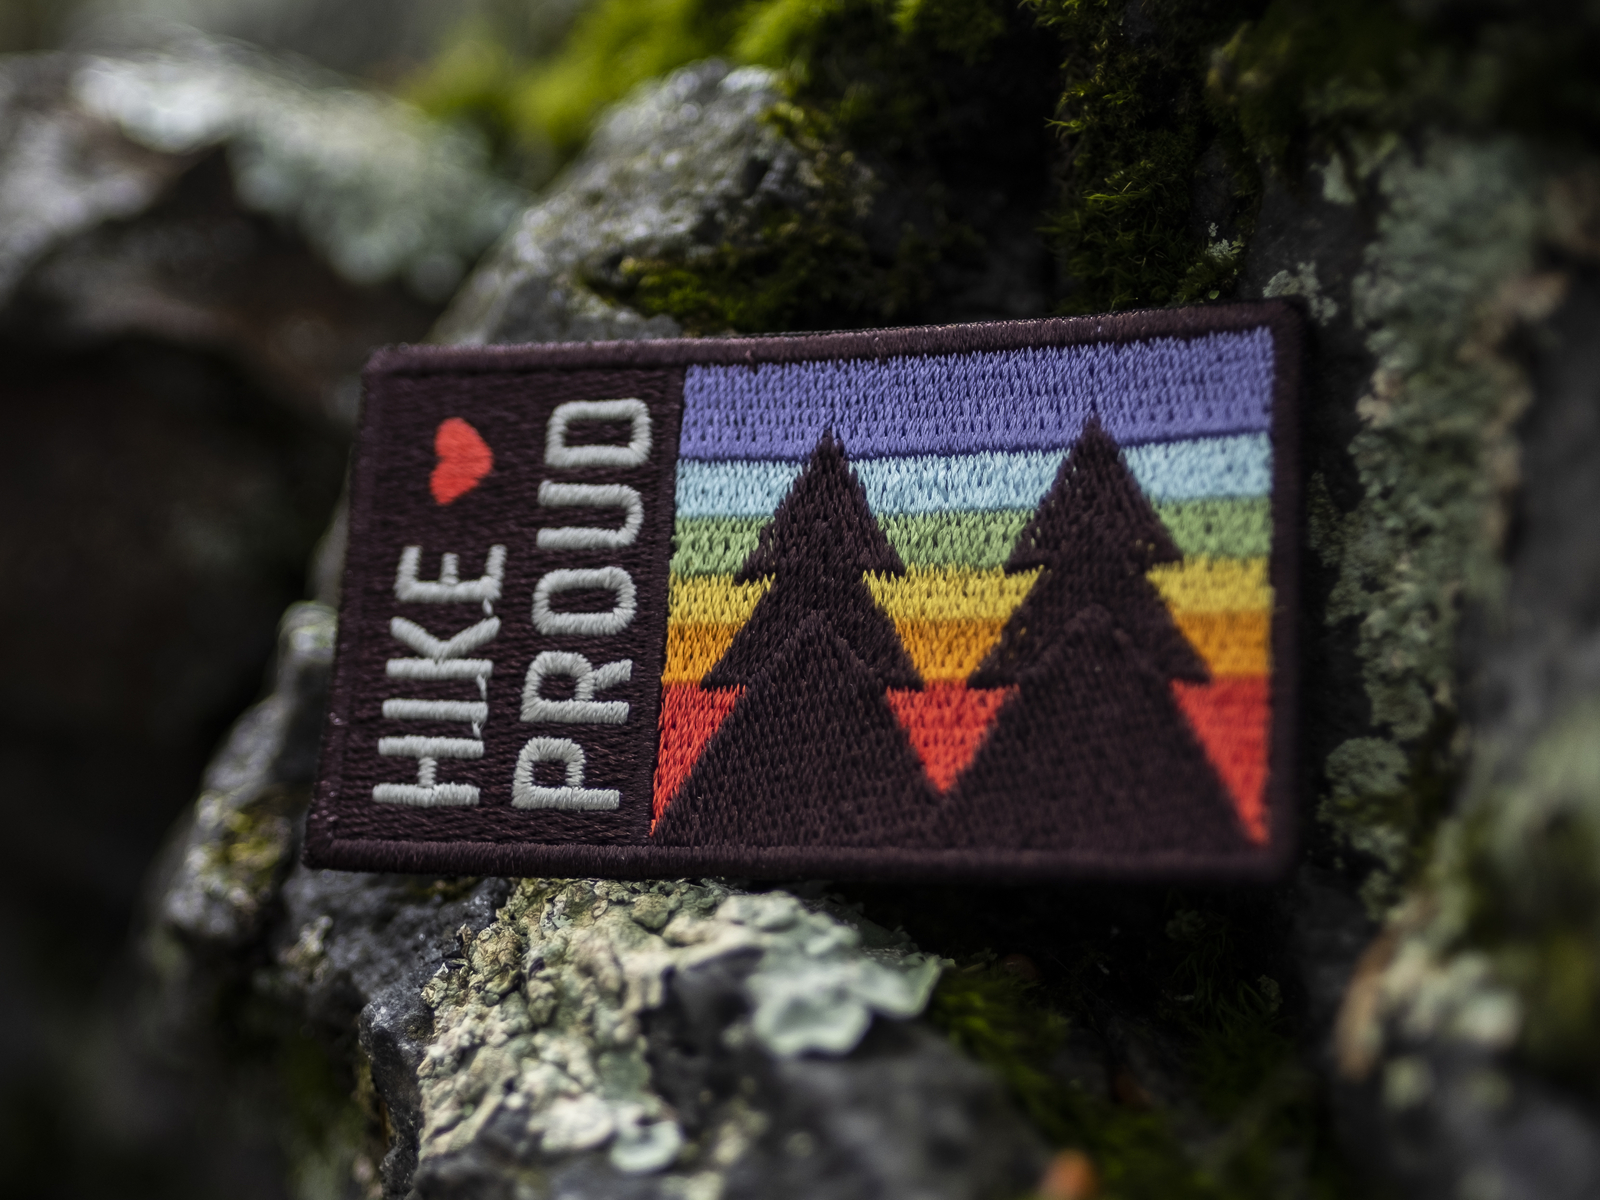 #Pride Inspiration: Celebrating #PrideMonth with hand-picked designs from Dribbble